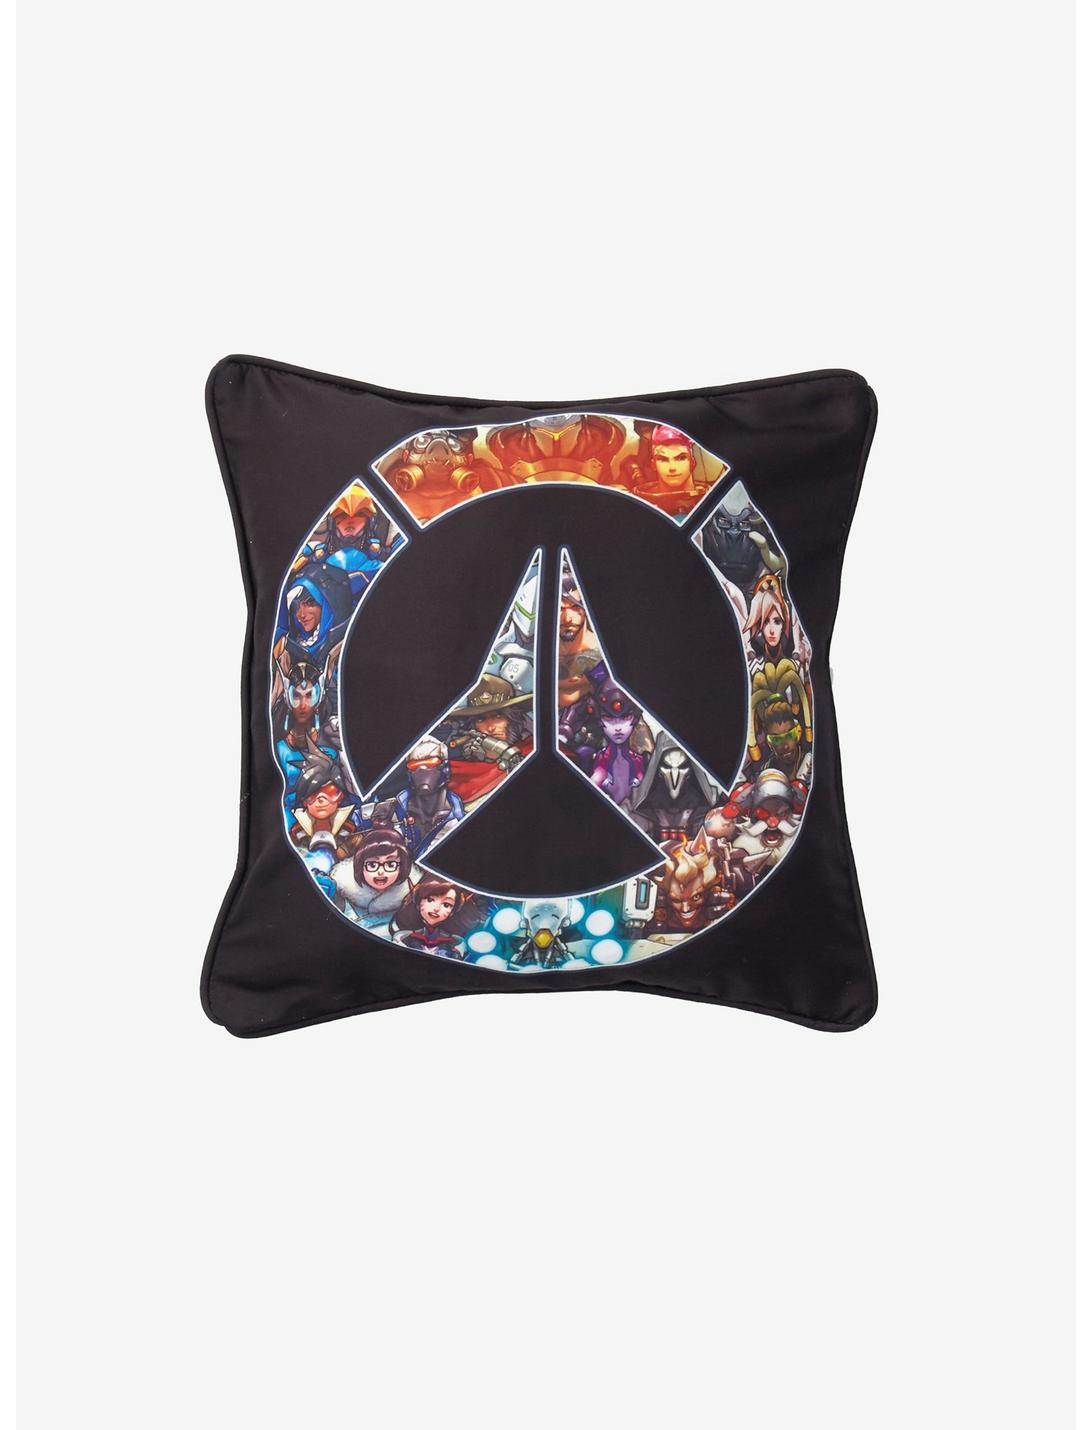 Overwatch Decorative Pillow Cover, , hi-res